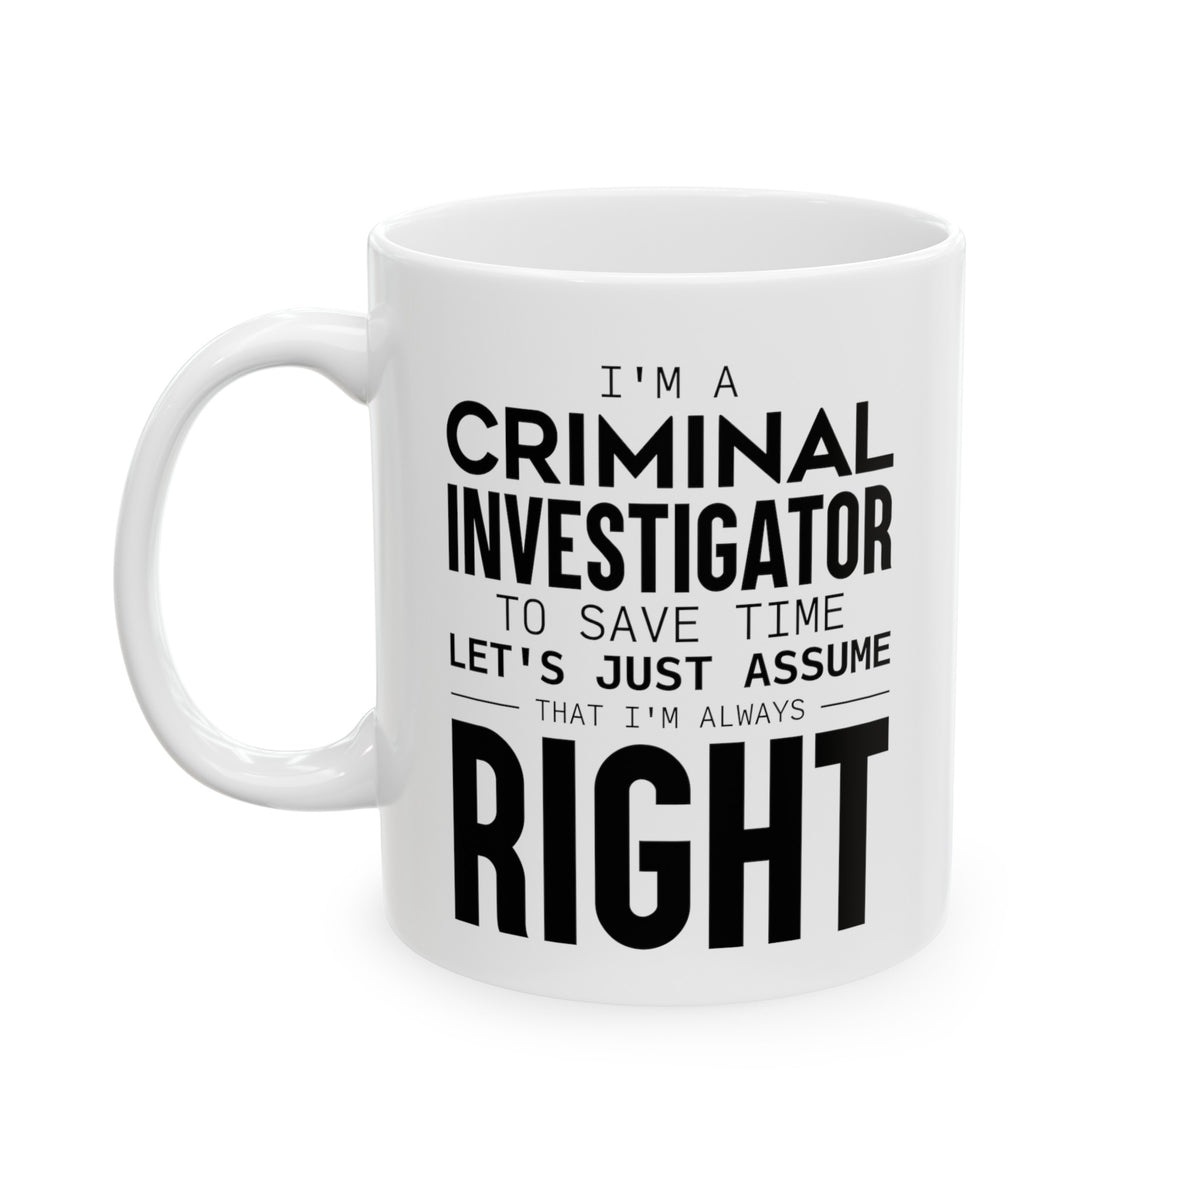 I’m A Criminal Investigator. To Save Time Let’s Just Assume That I’m Always Right - Perfect Tea Cup & Coffee Mug For Criminal Investigator